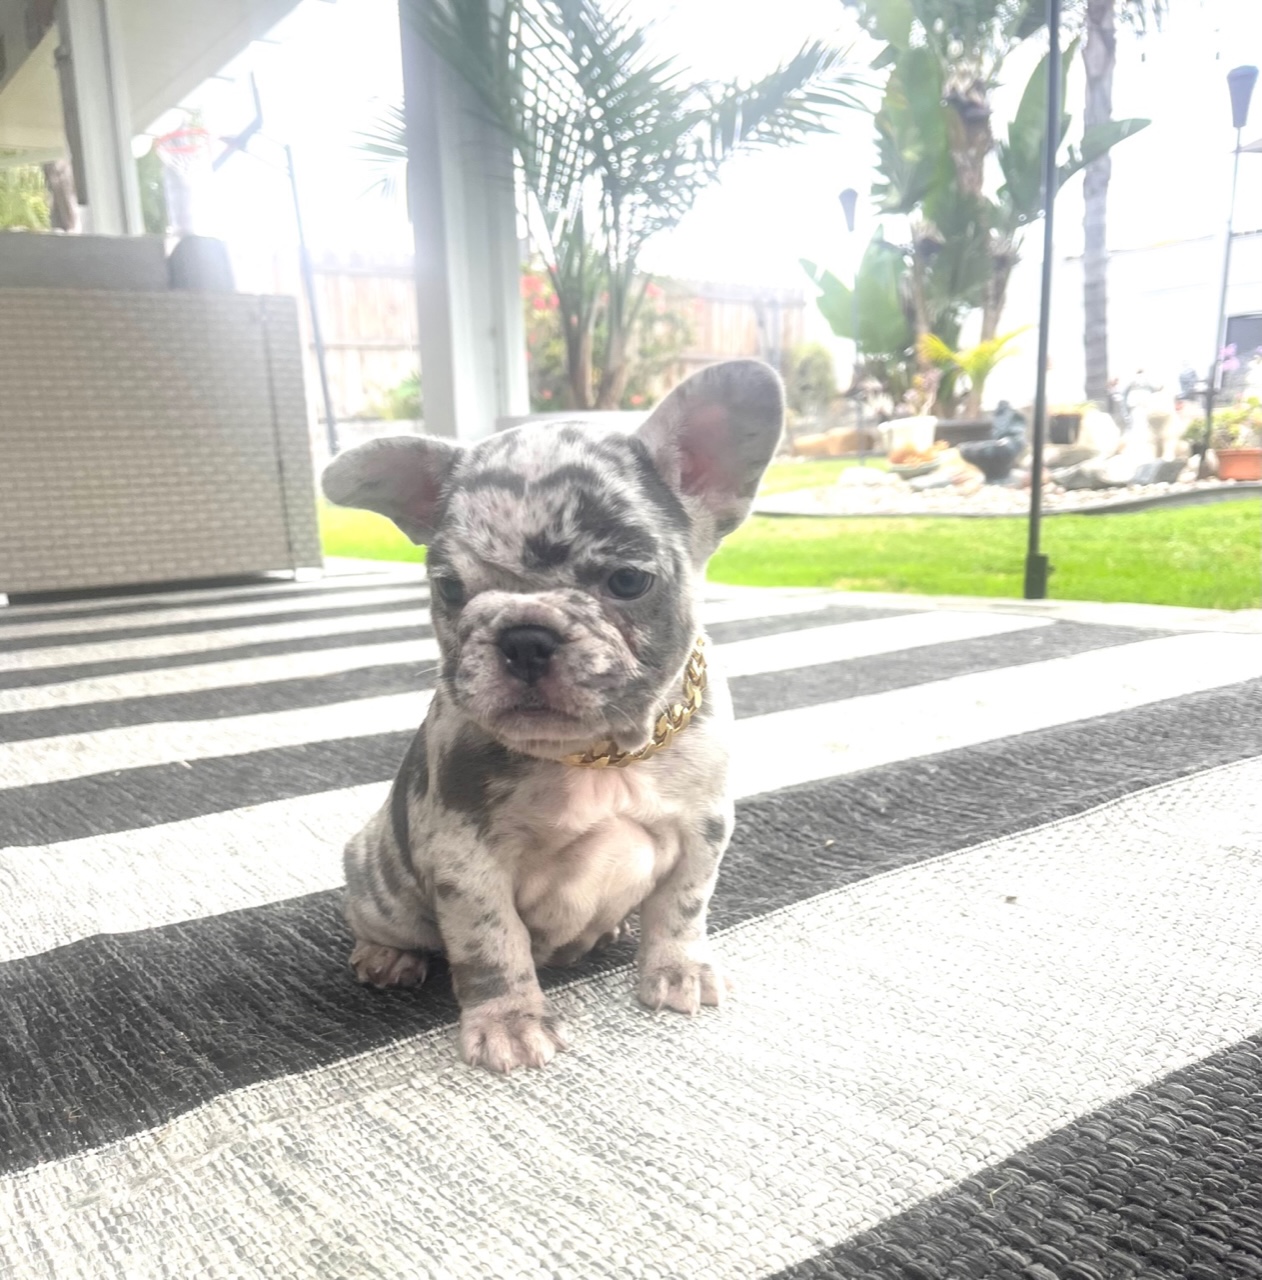 San Diego Royal Frenchies - Frenchie Puppies For Sale - Breeder